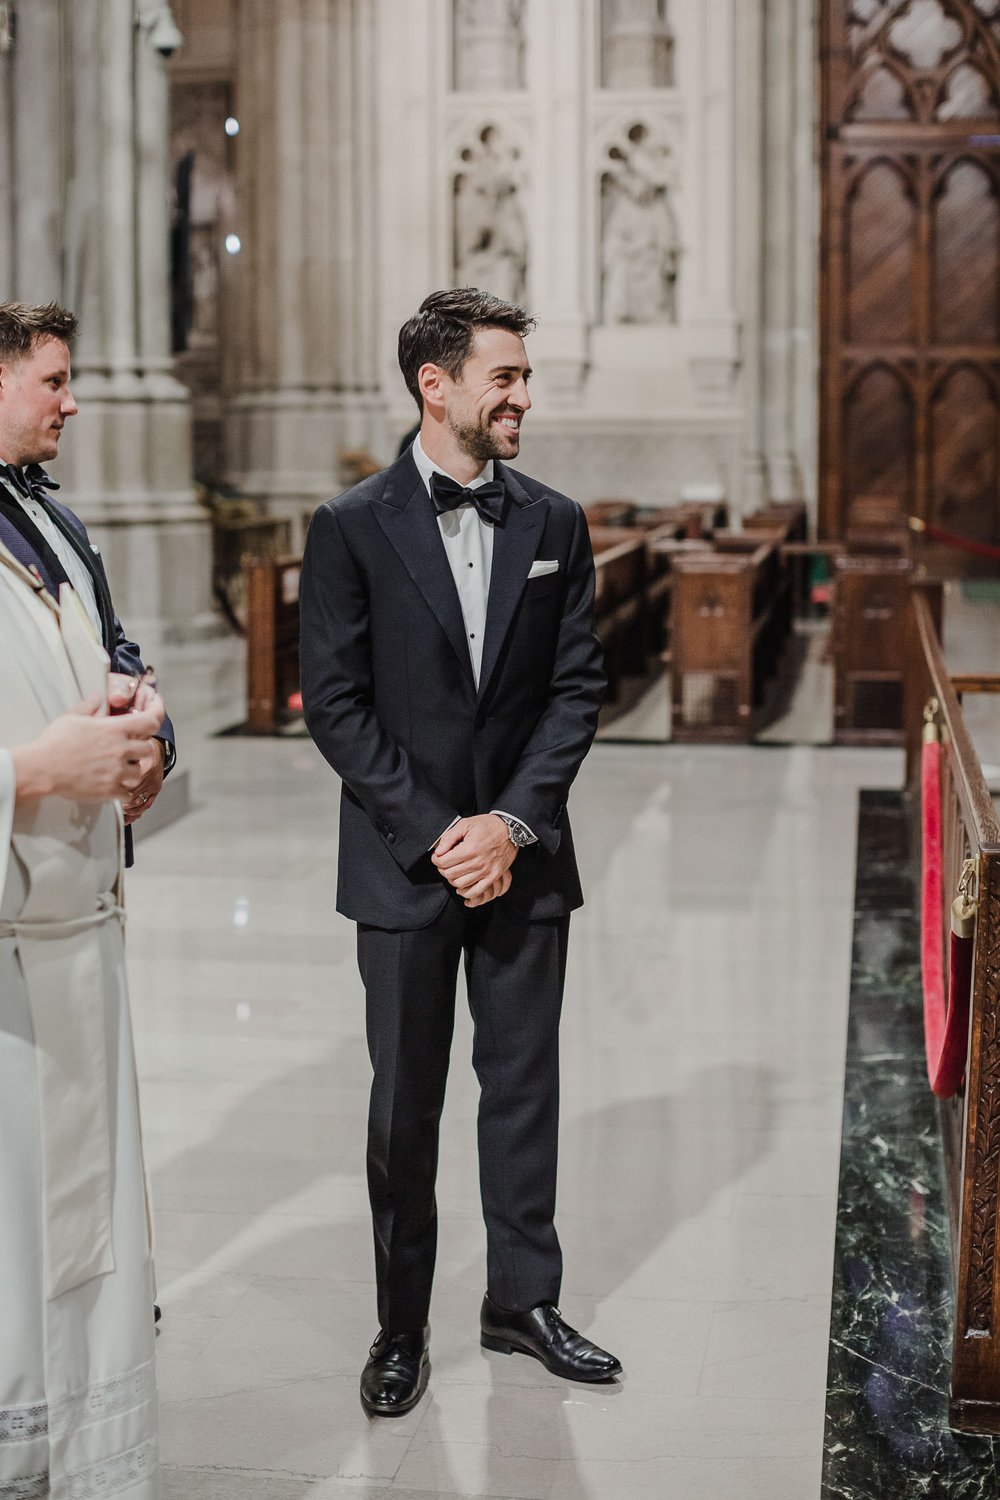 Classic New York Wedding at St. Patrick's Cathedral